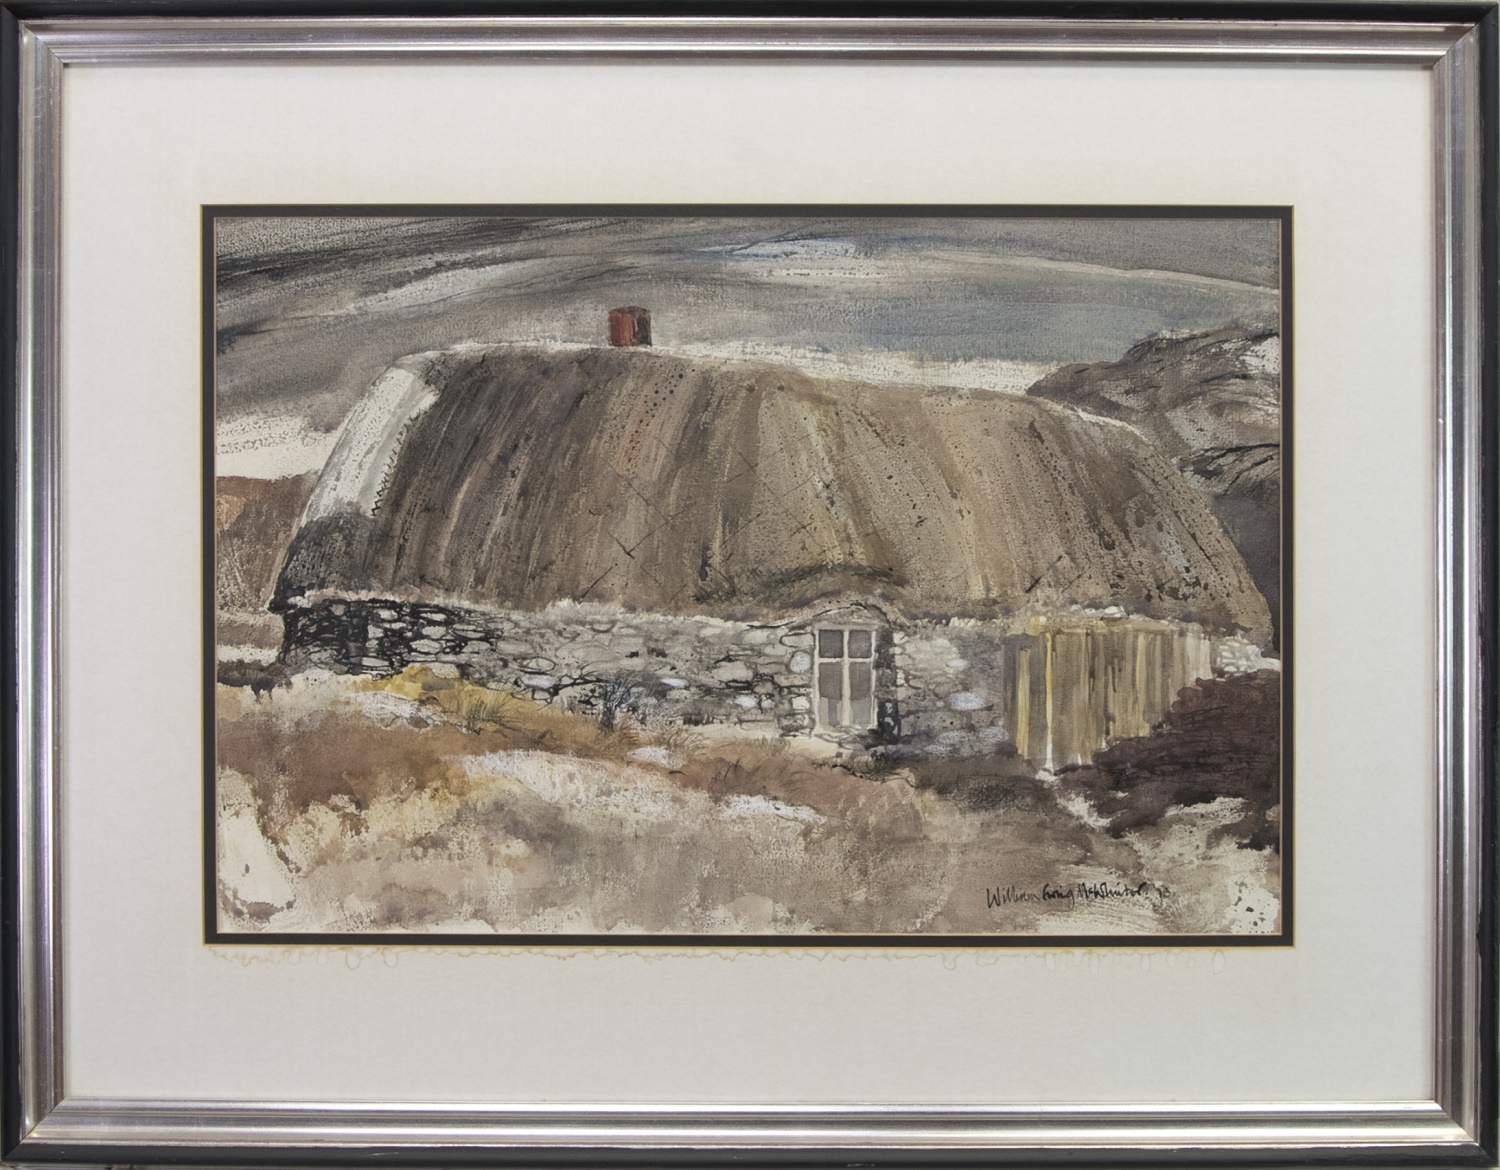 THATCHED DWELLING, A MIXED MEDIA BY WILLIAM EWING MCWHIRTER